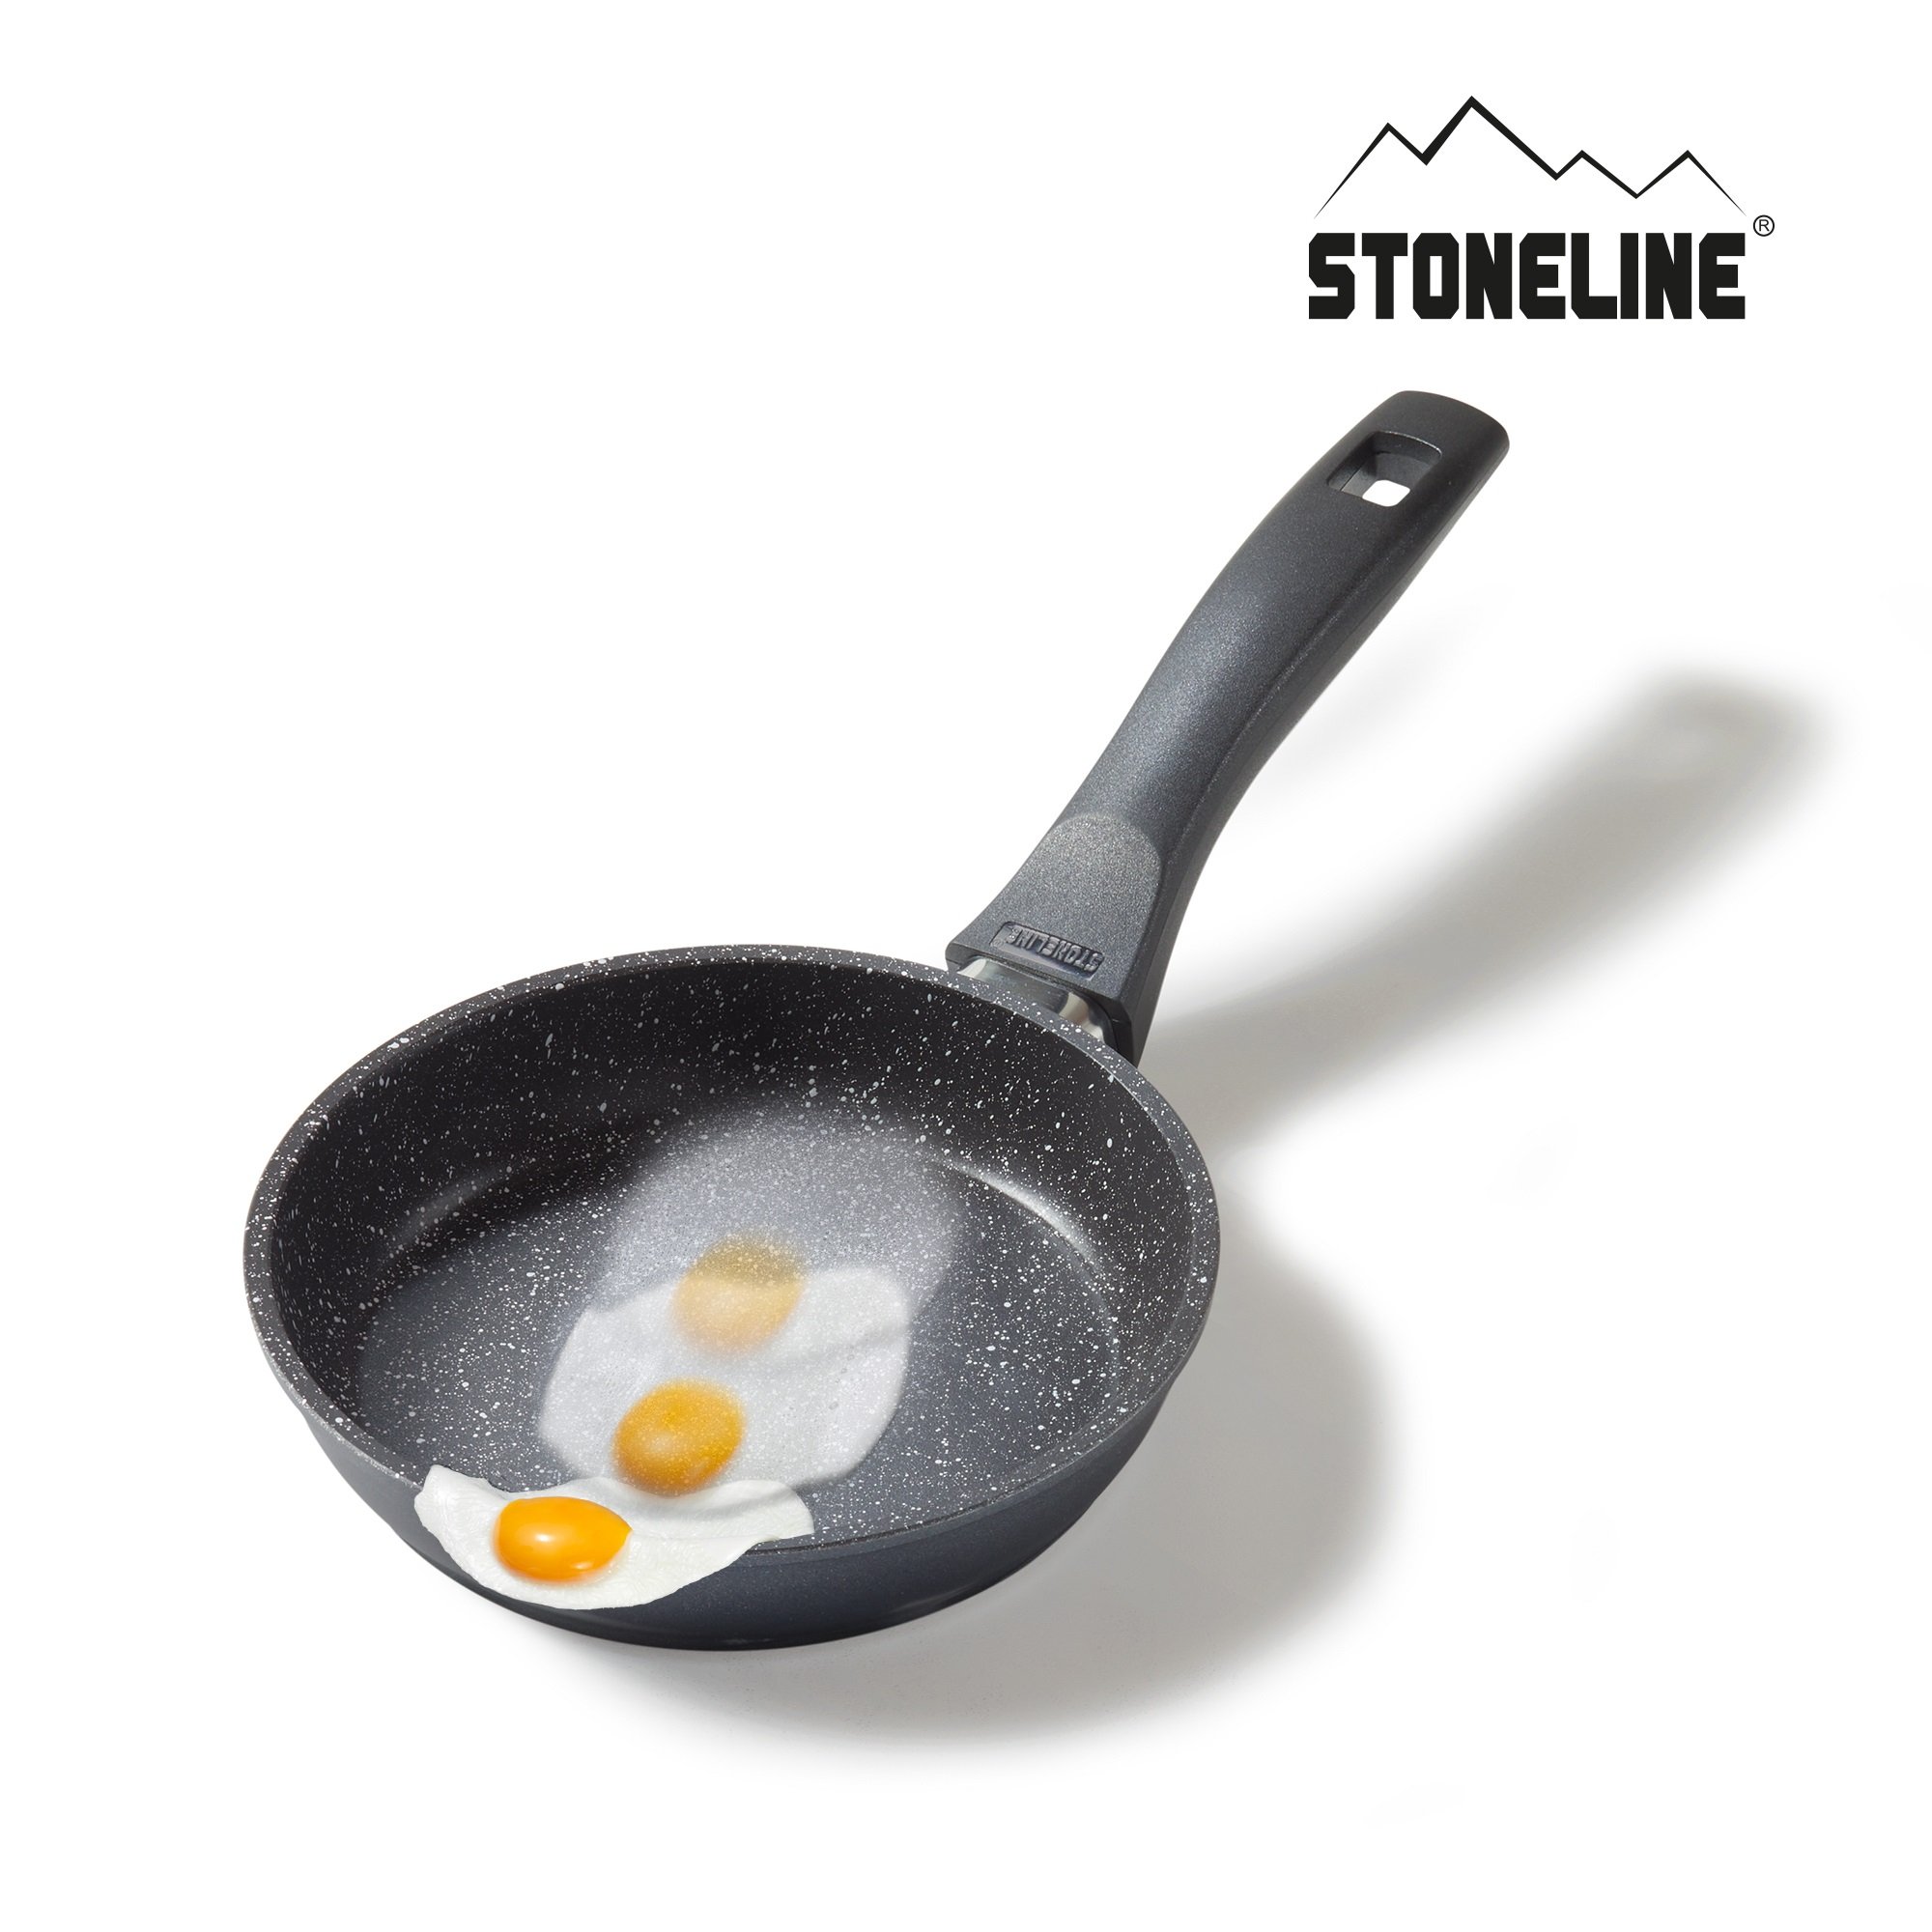 STONELINE® frying pan 16 cm, non-stick omelette pan, oven and induction suitable